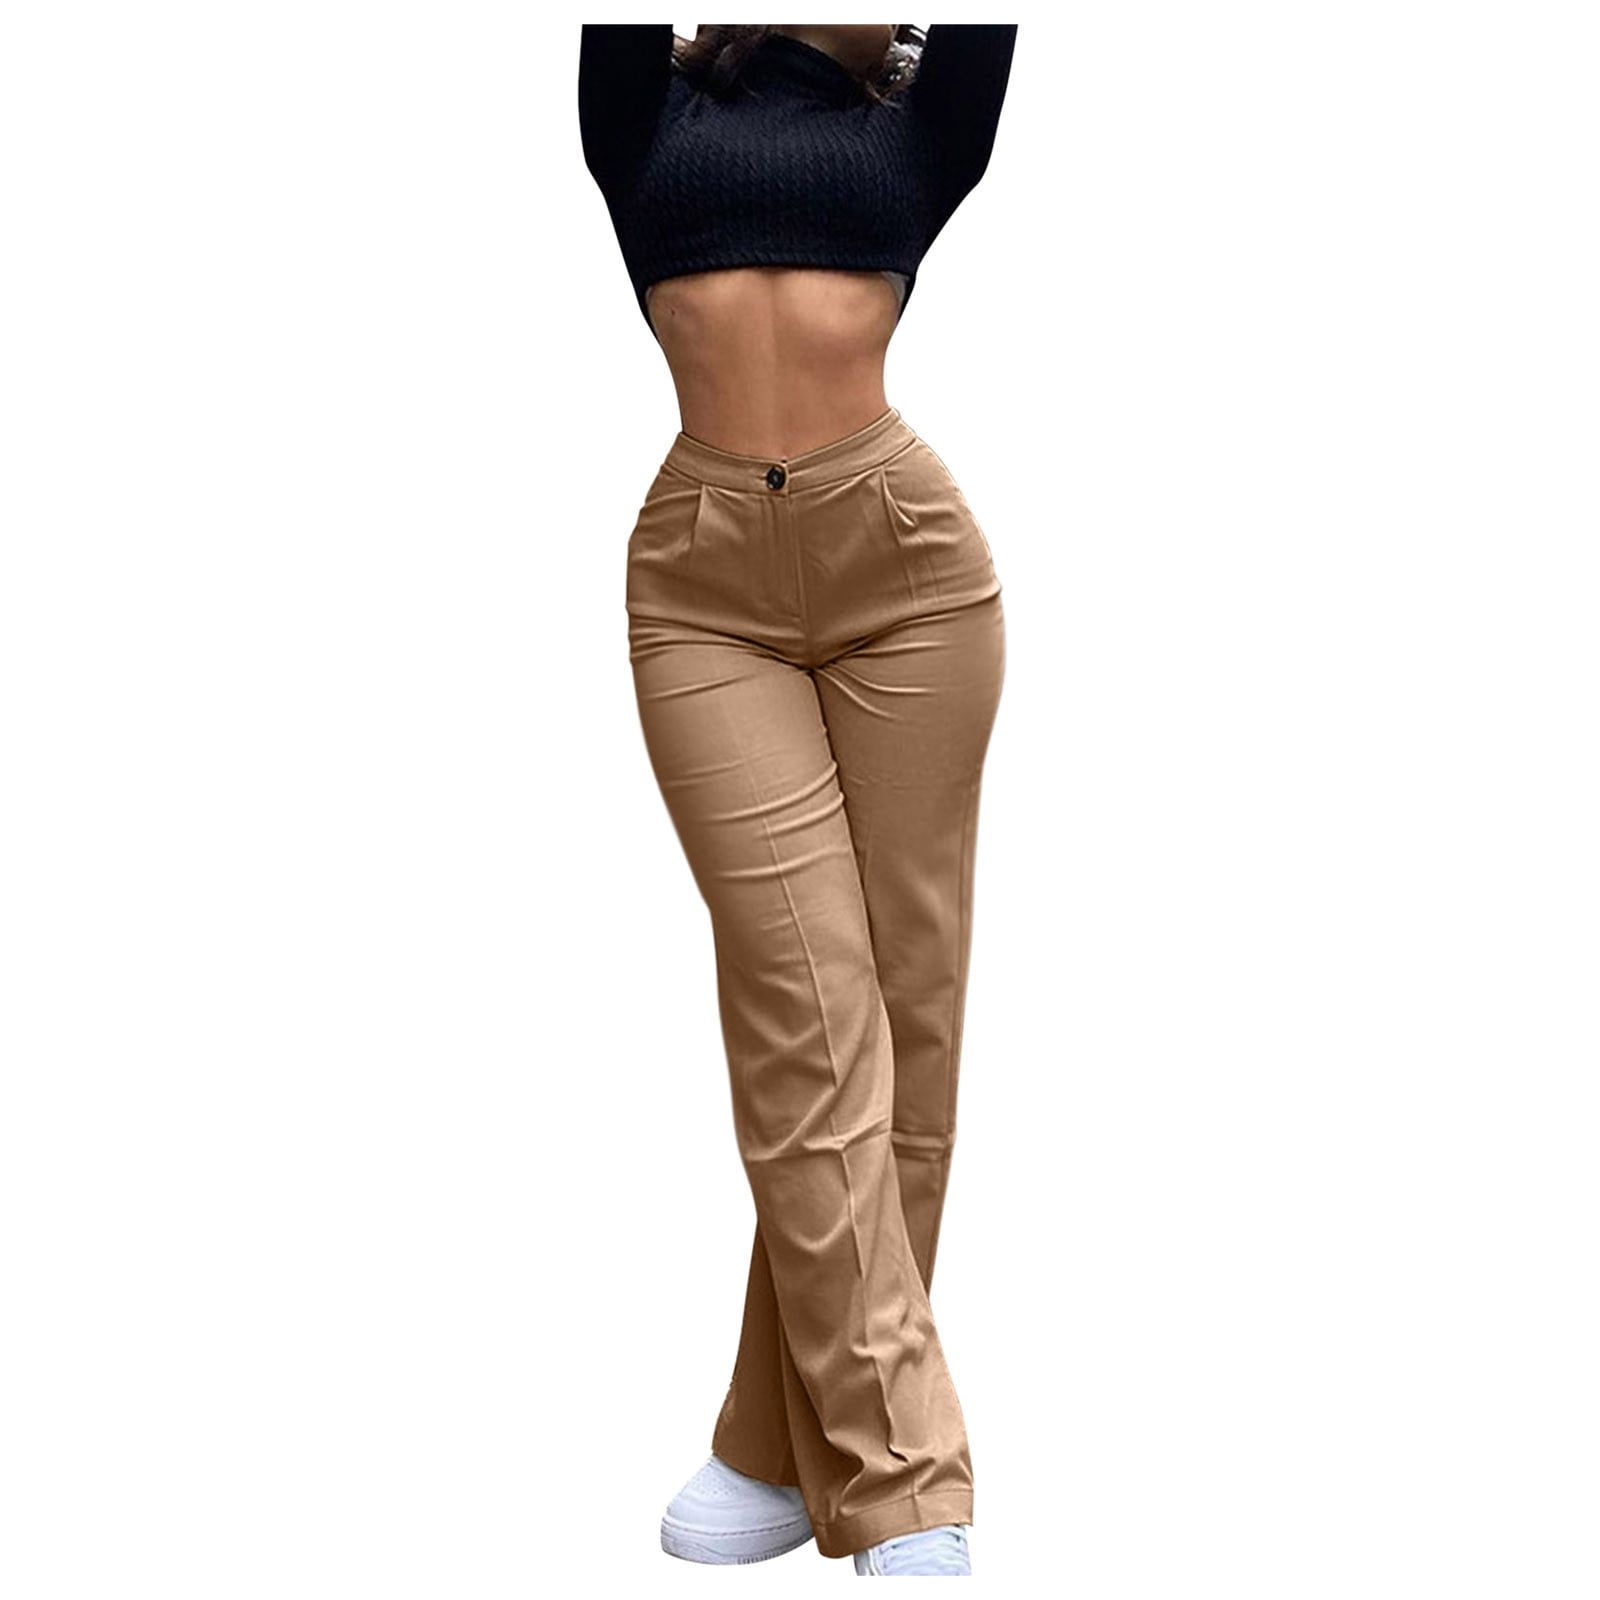 Oplxuo Women's High Waist Dress Pants, Solid Color Stretch Work Pants for  Women, Dress Slacks for Women Work Business Casual at  Women's  Clothing store